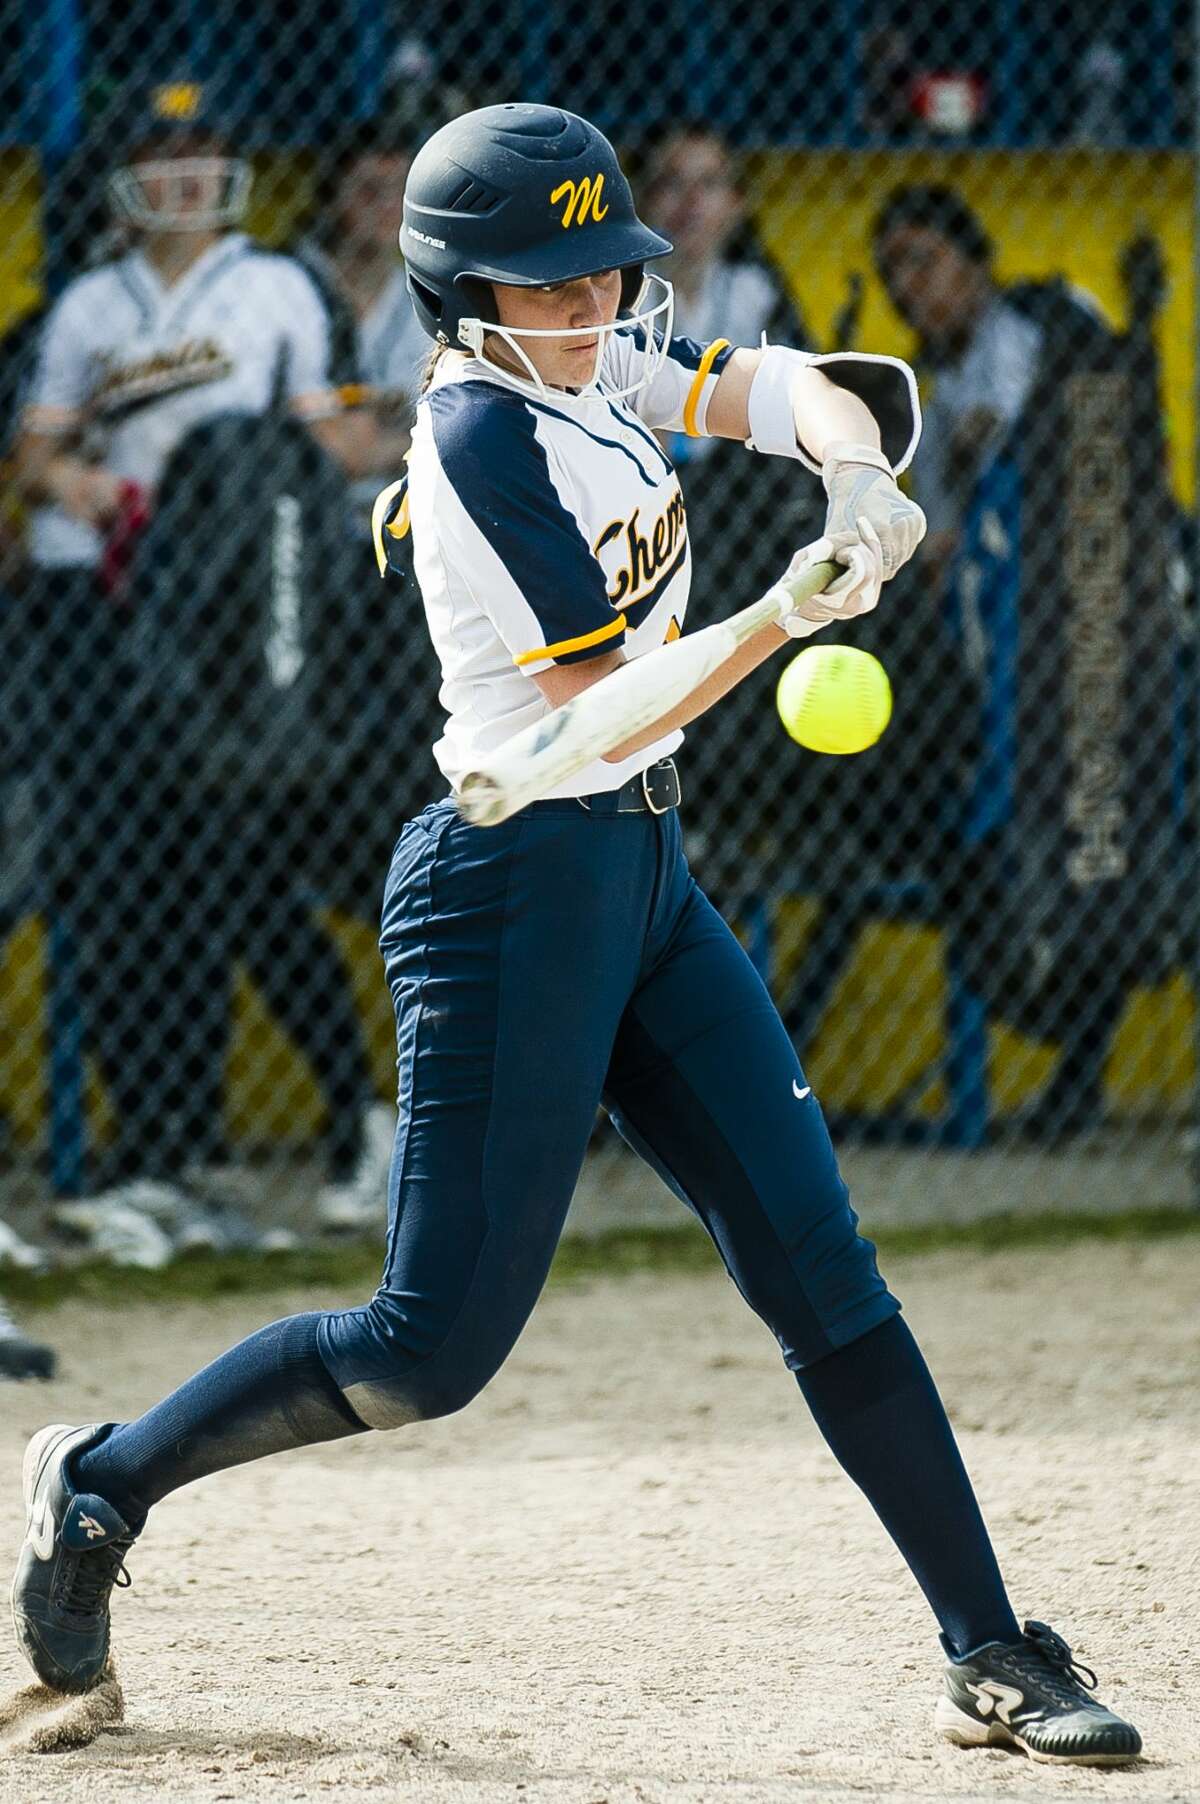 Midland's Maggie Gomola swings on a pitch during a game against Lapeer on Monday, April 22, 2019 at Midland High School. (Katy Kildee/kkildee@mdn.net)